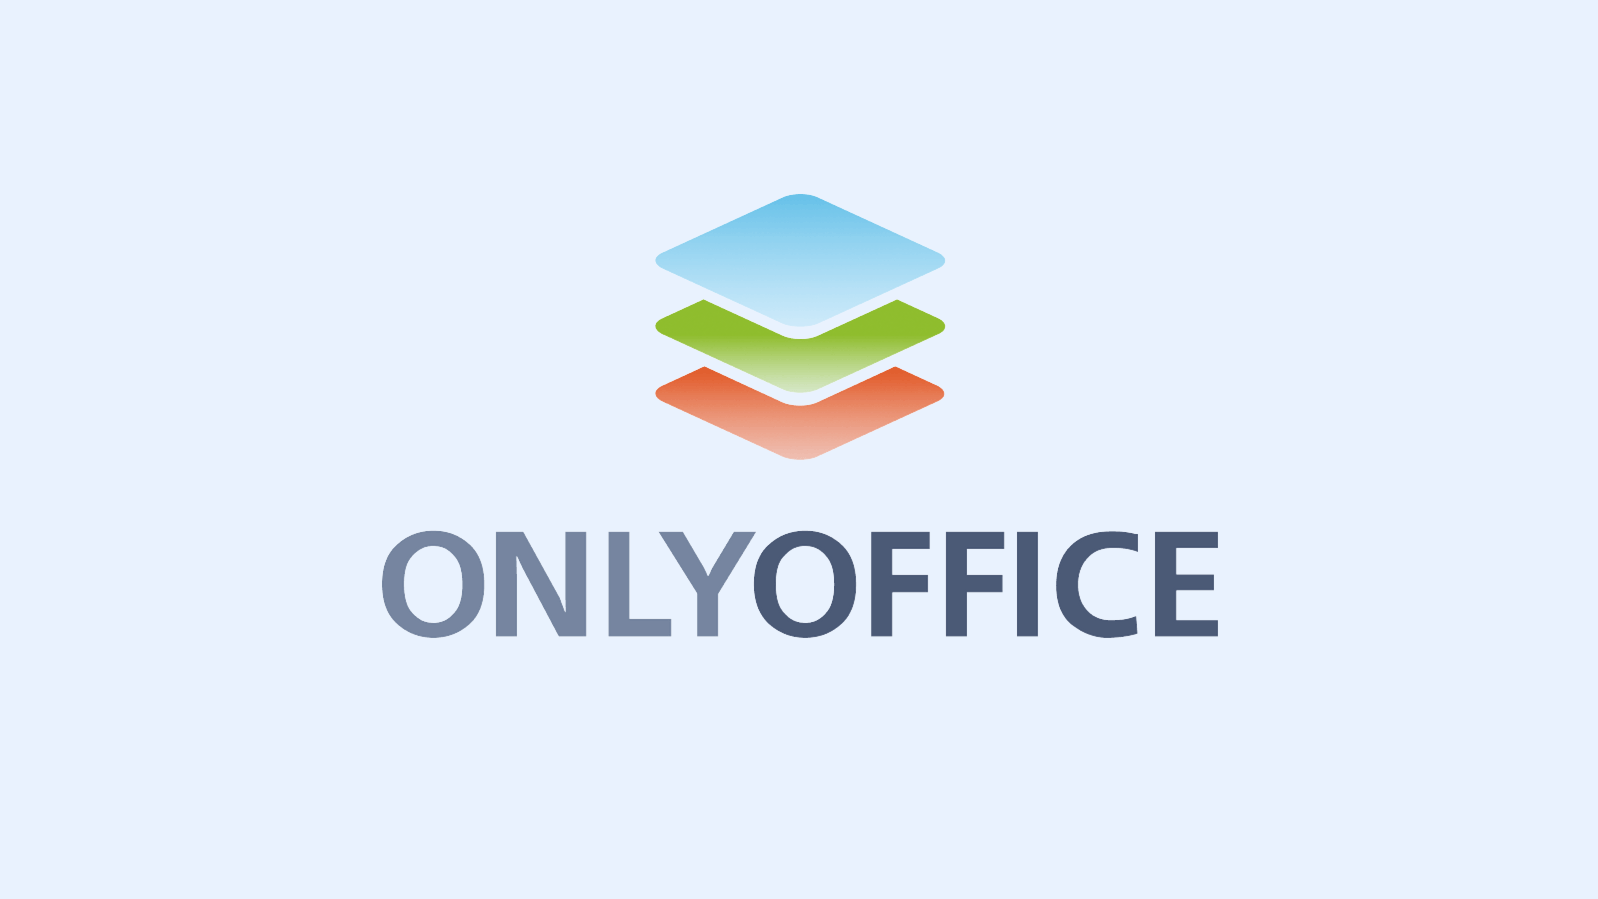 ONLYOFFICE 7.4.1.36 instaling